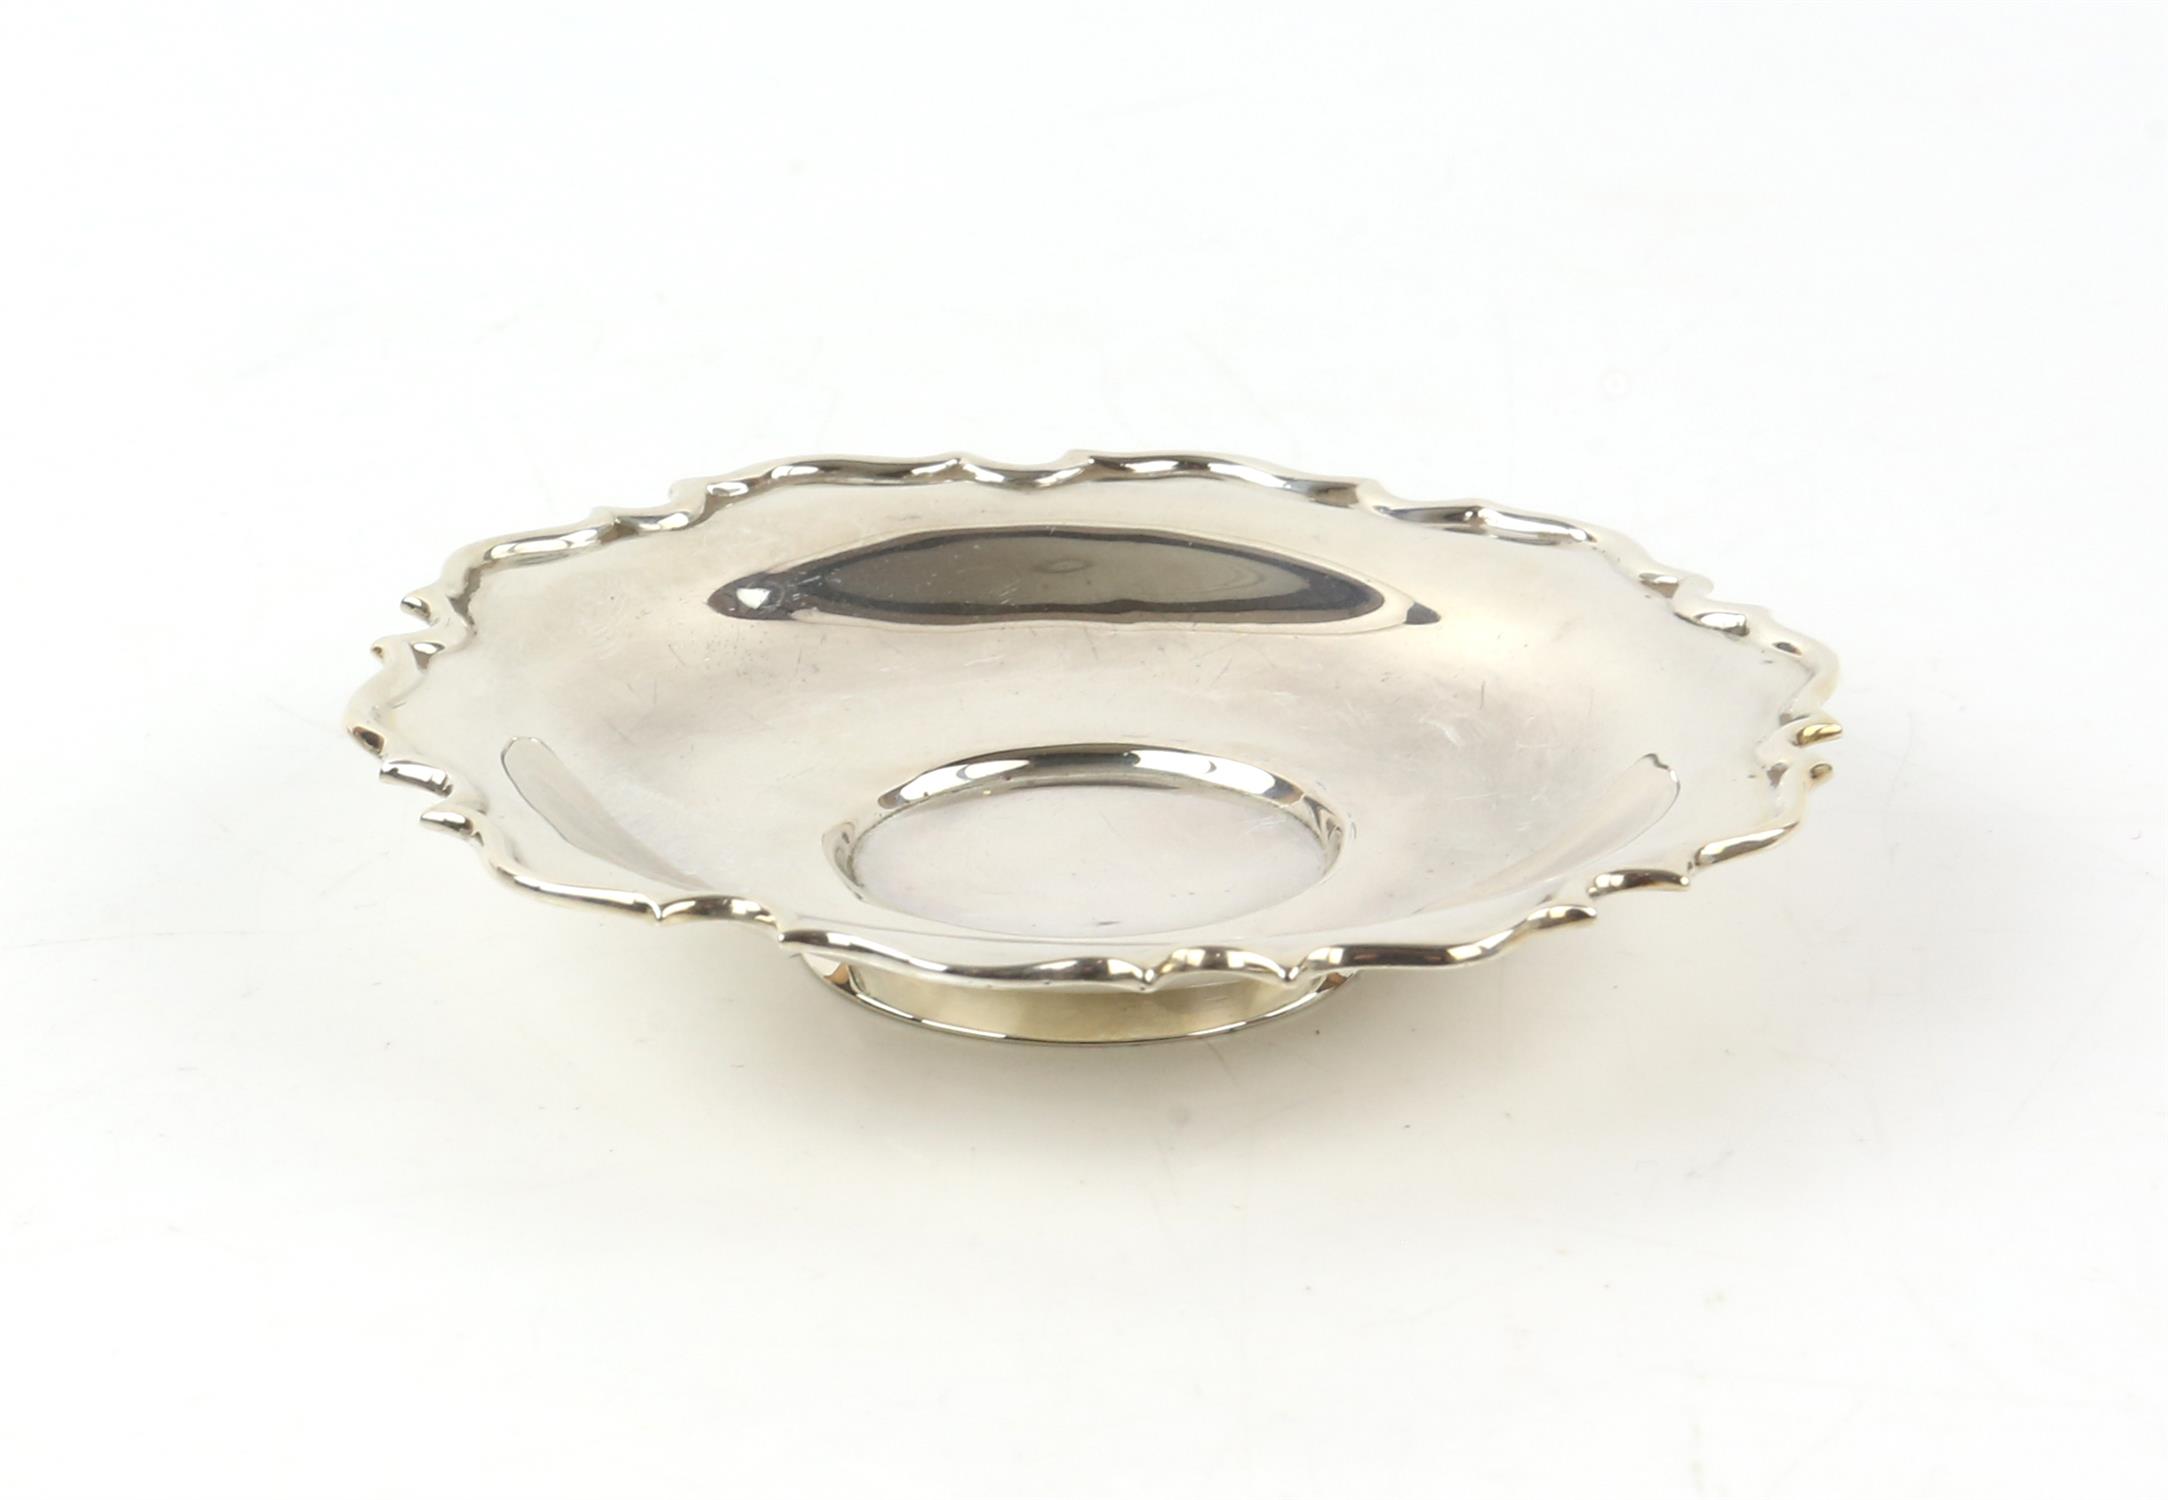 George V silver miniature circular comport with pierced decoration, filled base, maker's mark 'WB', - Image 4 of 11